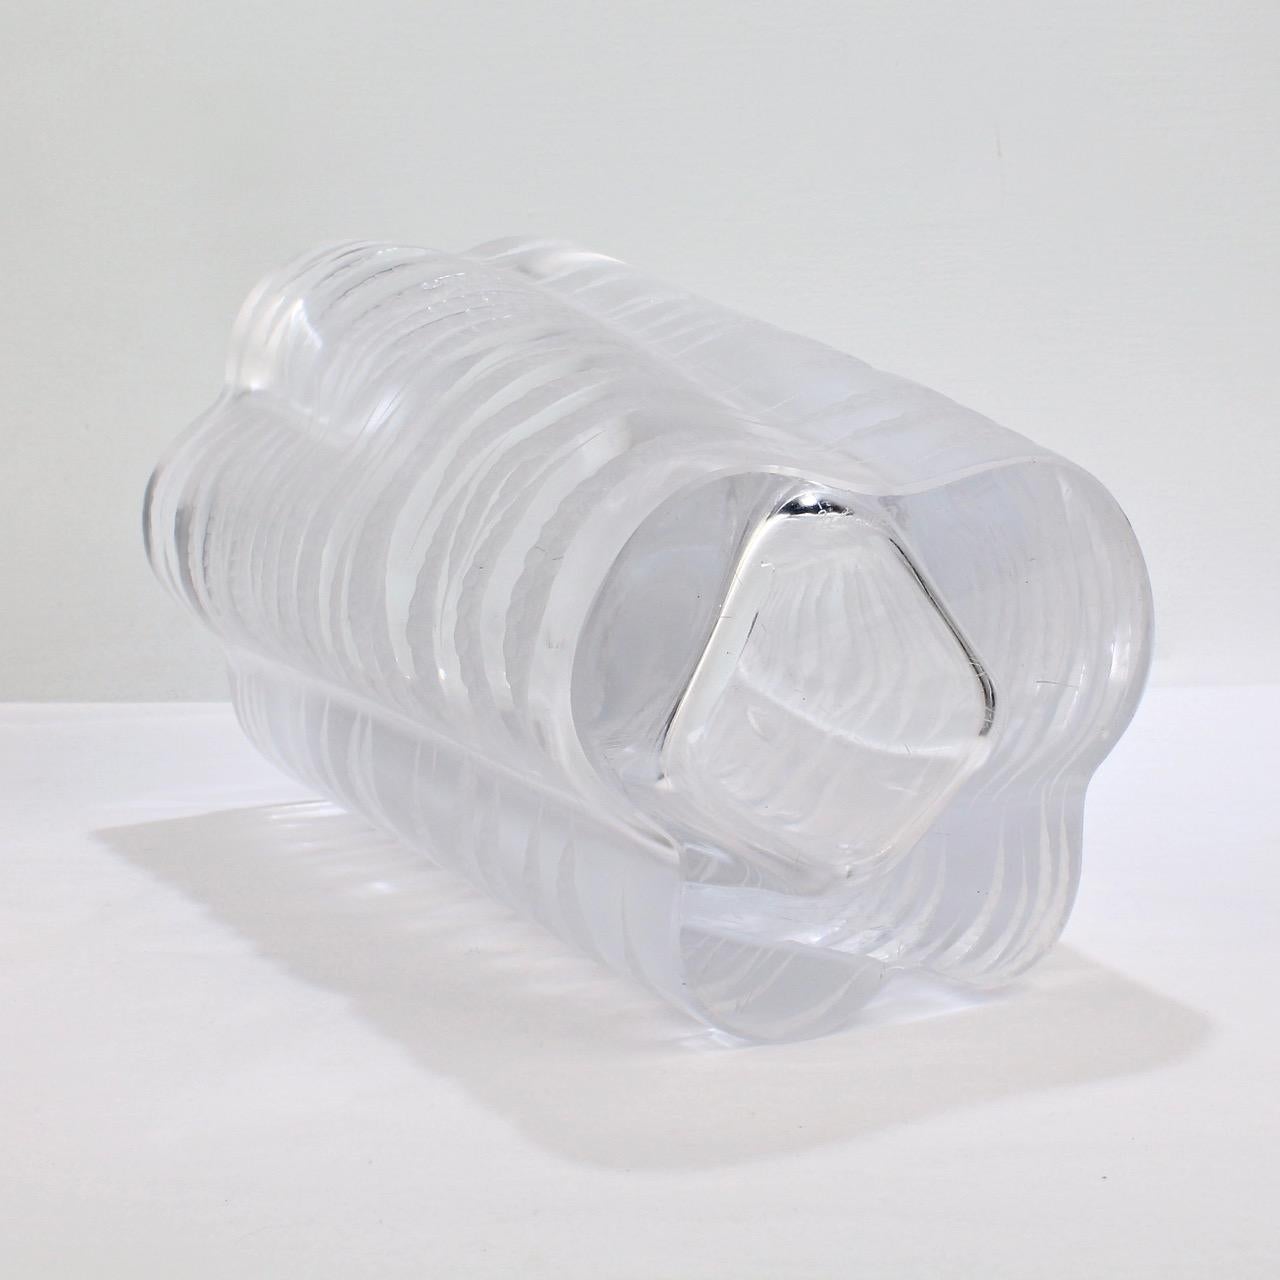 Senlis, a Mid-Century Modern French Art Glass Vase by Marc Lalique for Lalique 3